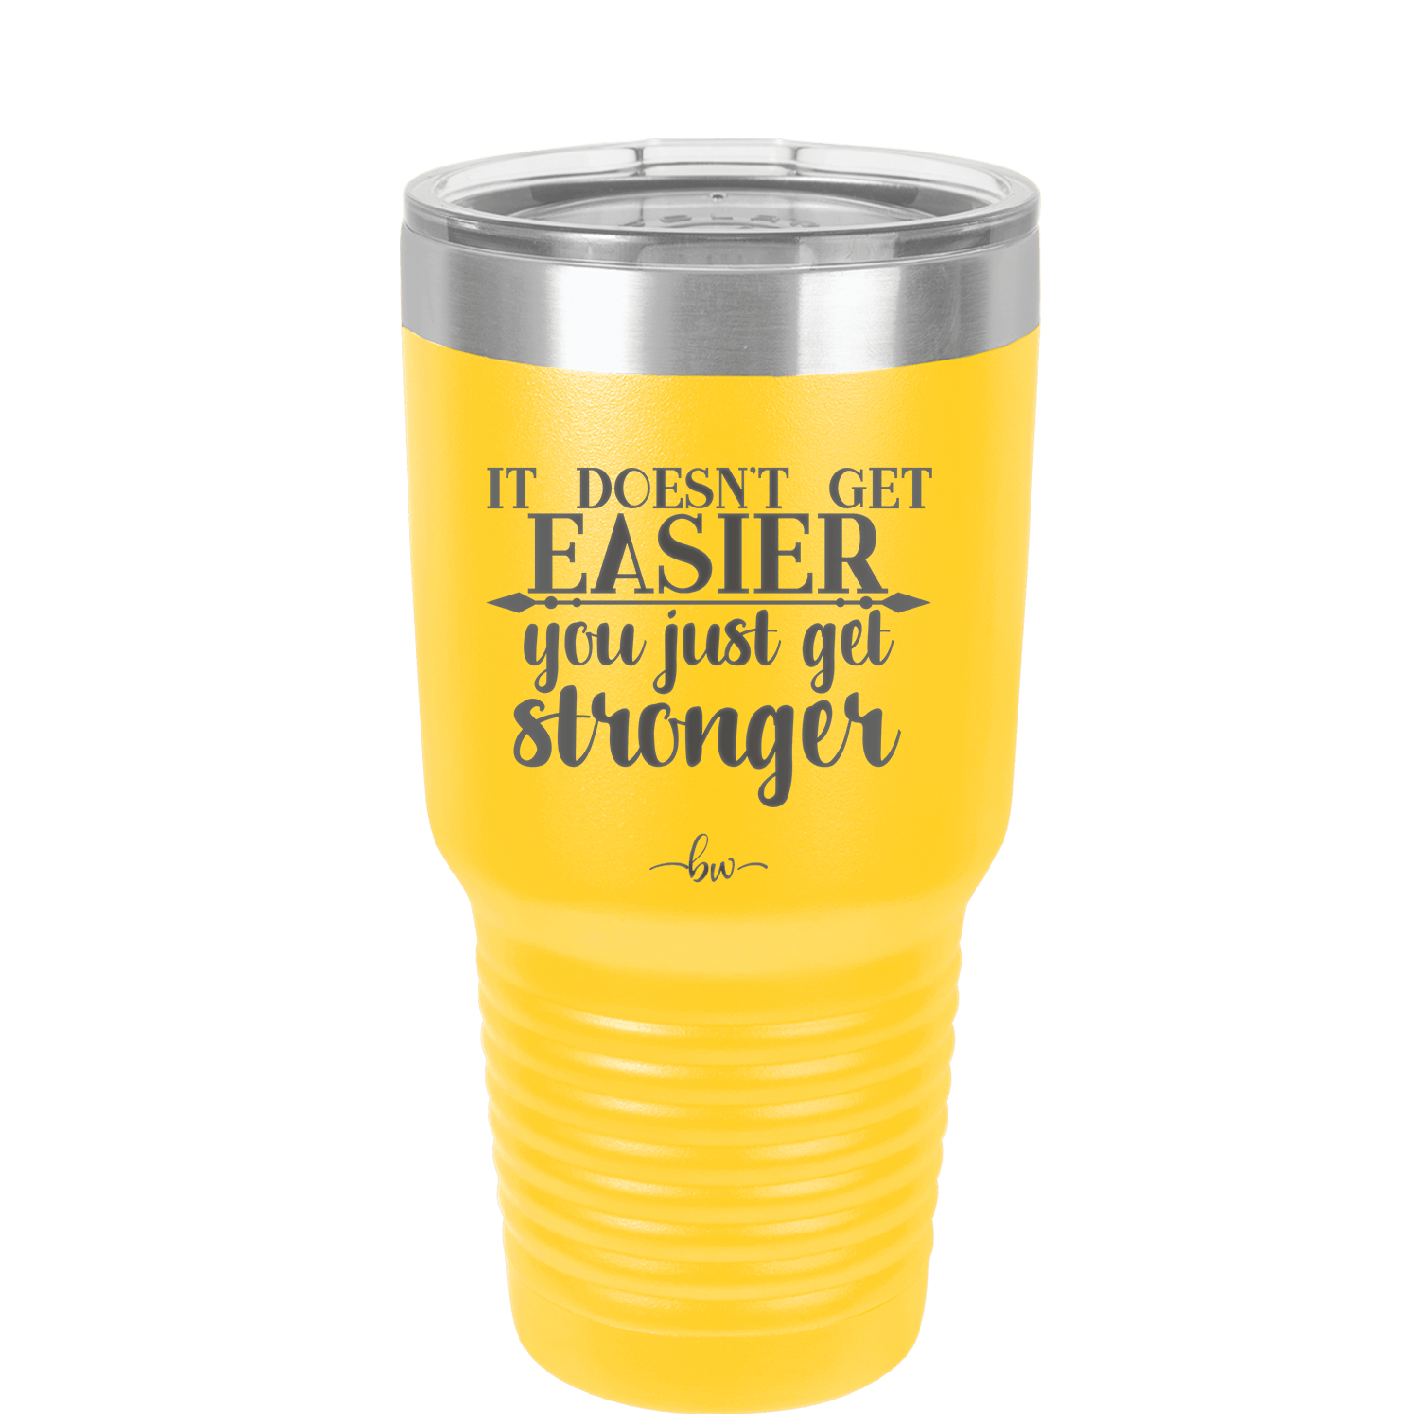 It Doesn't Get Easier You Just Get Stronger 2 - Laser Engraved Stainless Steel Drinkware - 1642 -